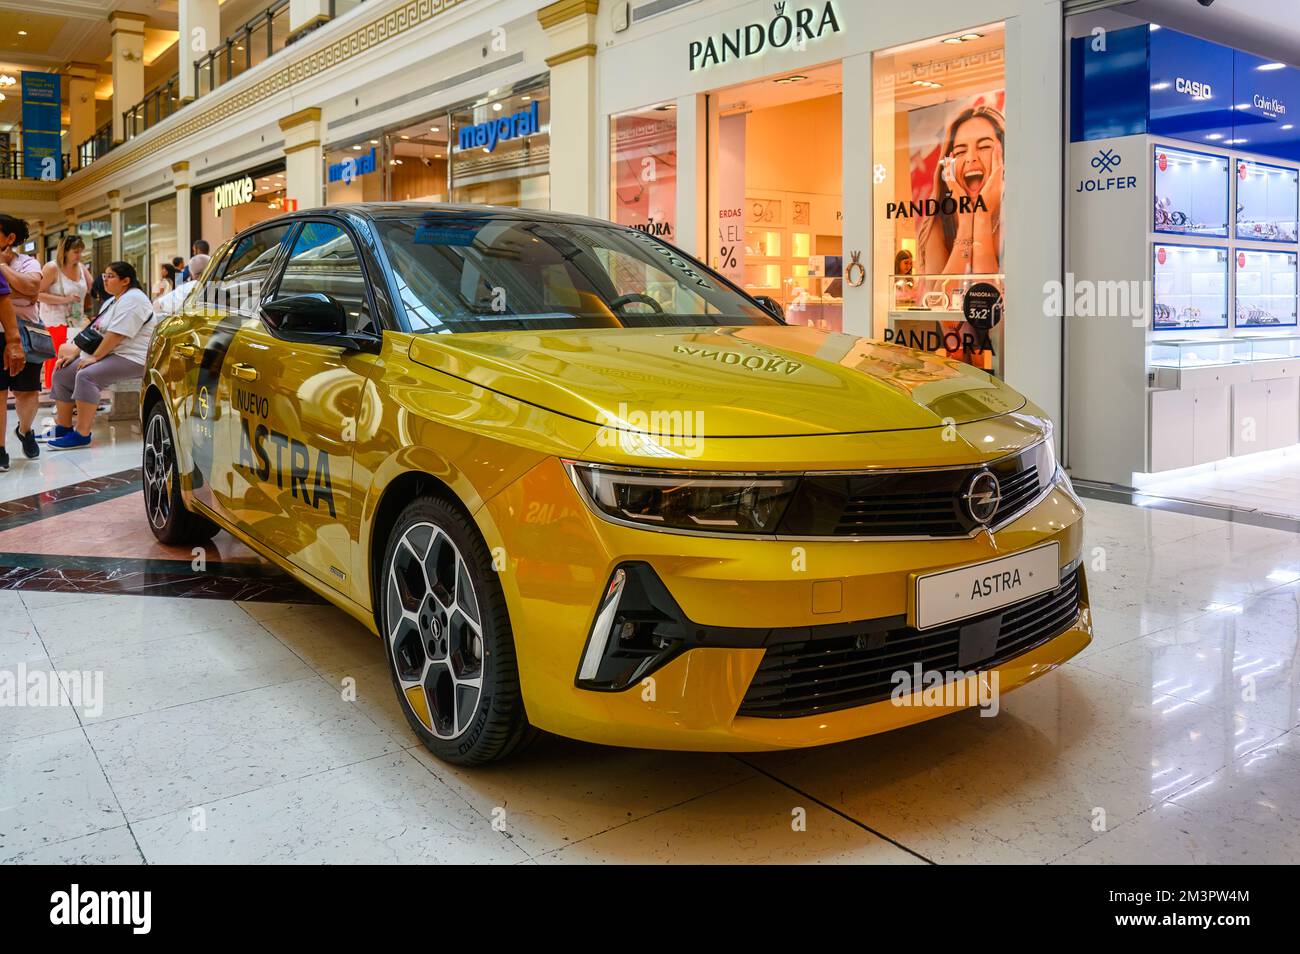 Plaza Mar 2 shopping mall in Alicante, Spain: A new Opel Astra car is being promoted in a corridor of the building interior Stock Photo